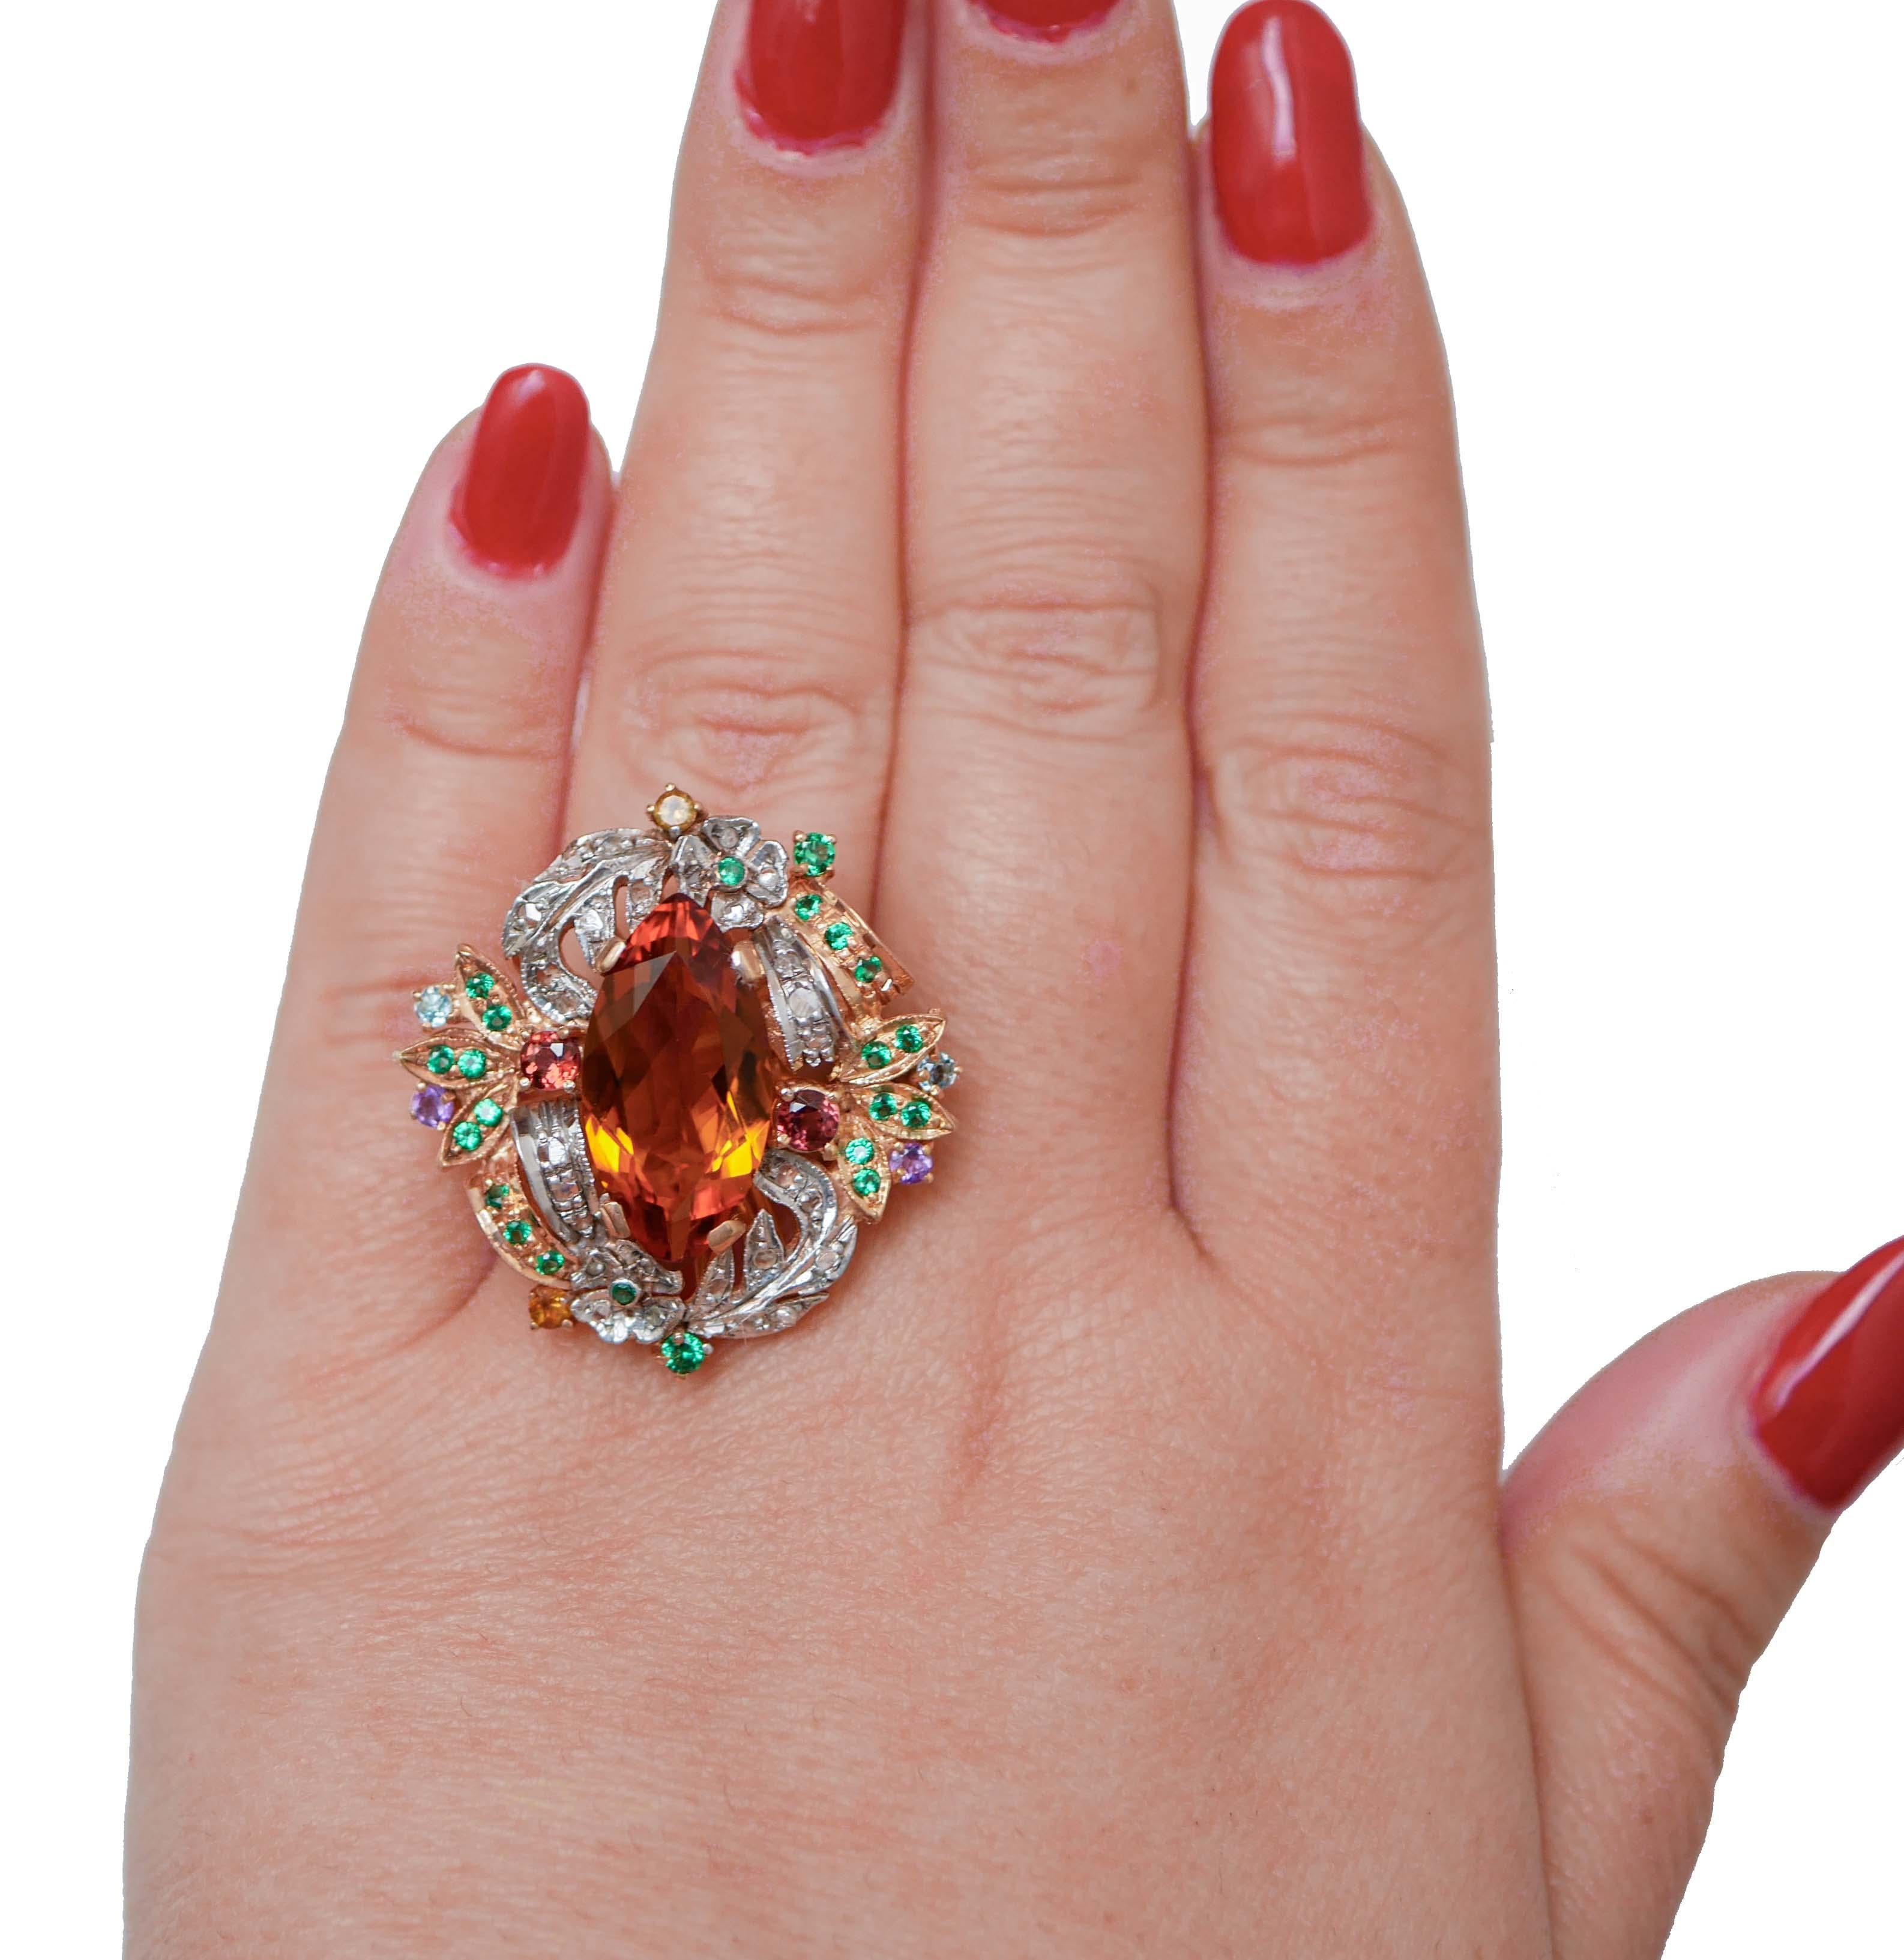 Mixed Cut Hydro Topaz, Hydro Spinel, Garnet, Amethyst, Diamonds, 14Kt Gold and Silver Ring